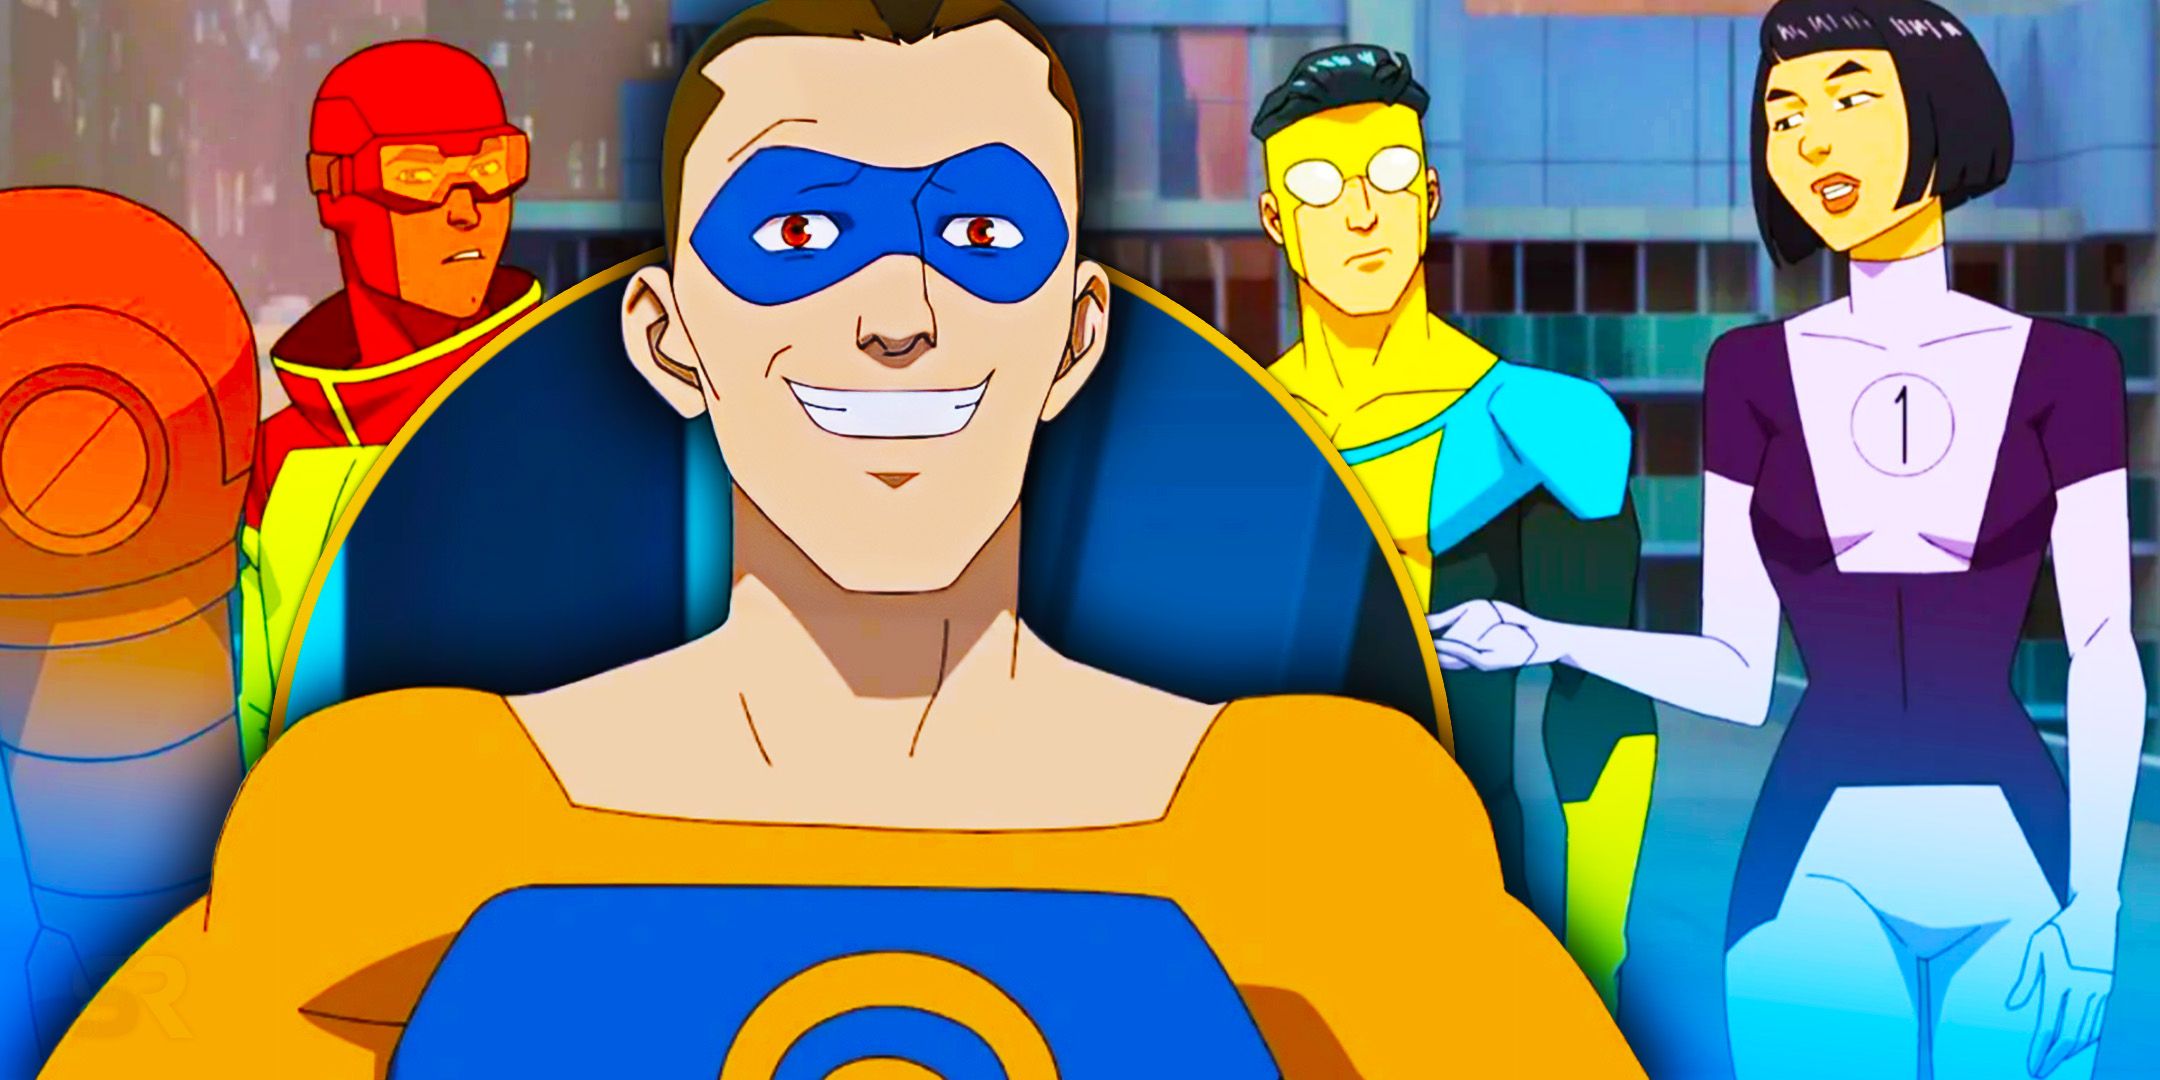 Shapesmith's Invincible Season 3 Return Confirmed By Star After "Beautiful" Season 2 Arc